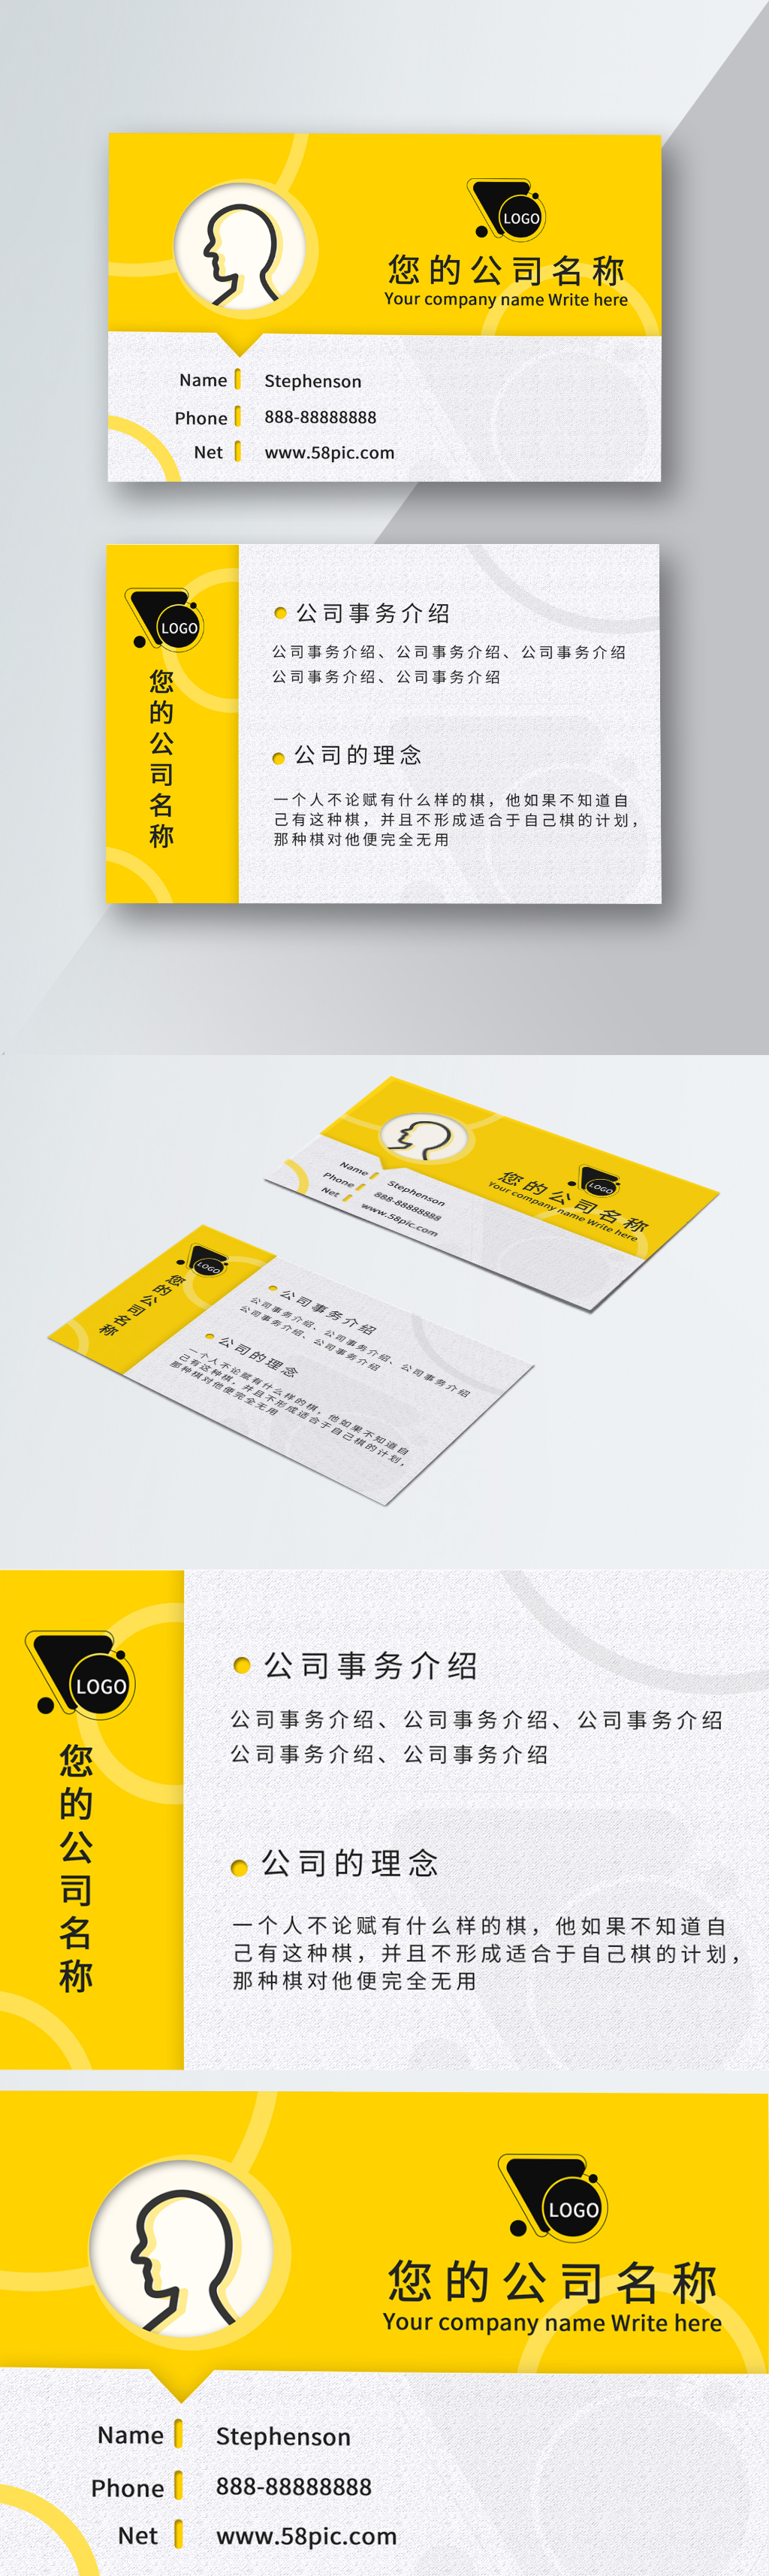 Yellow Business Card Template Image Picture Free Download 400507300 Lovepik Com